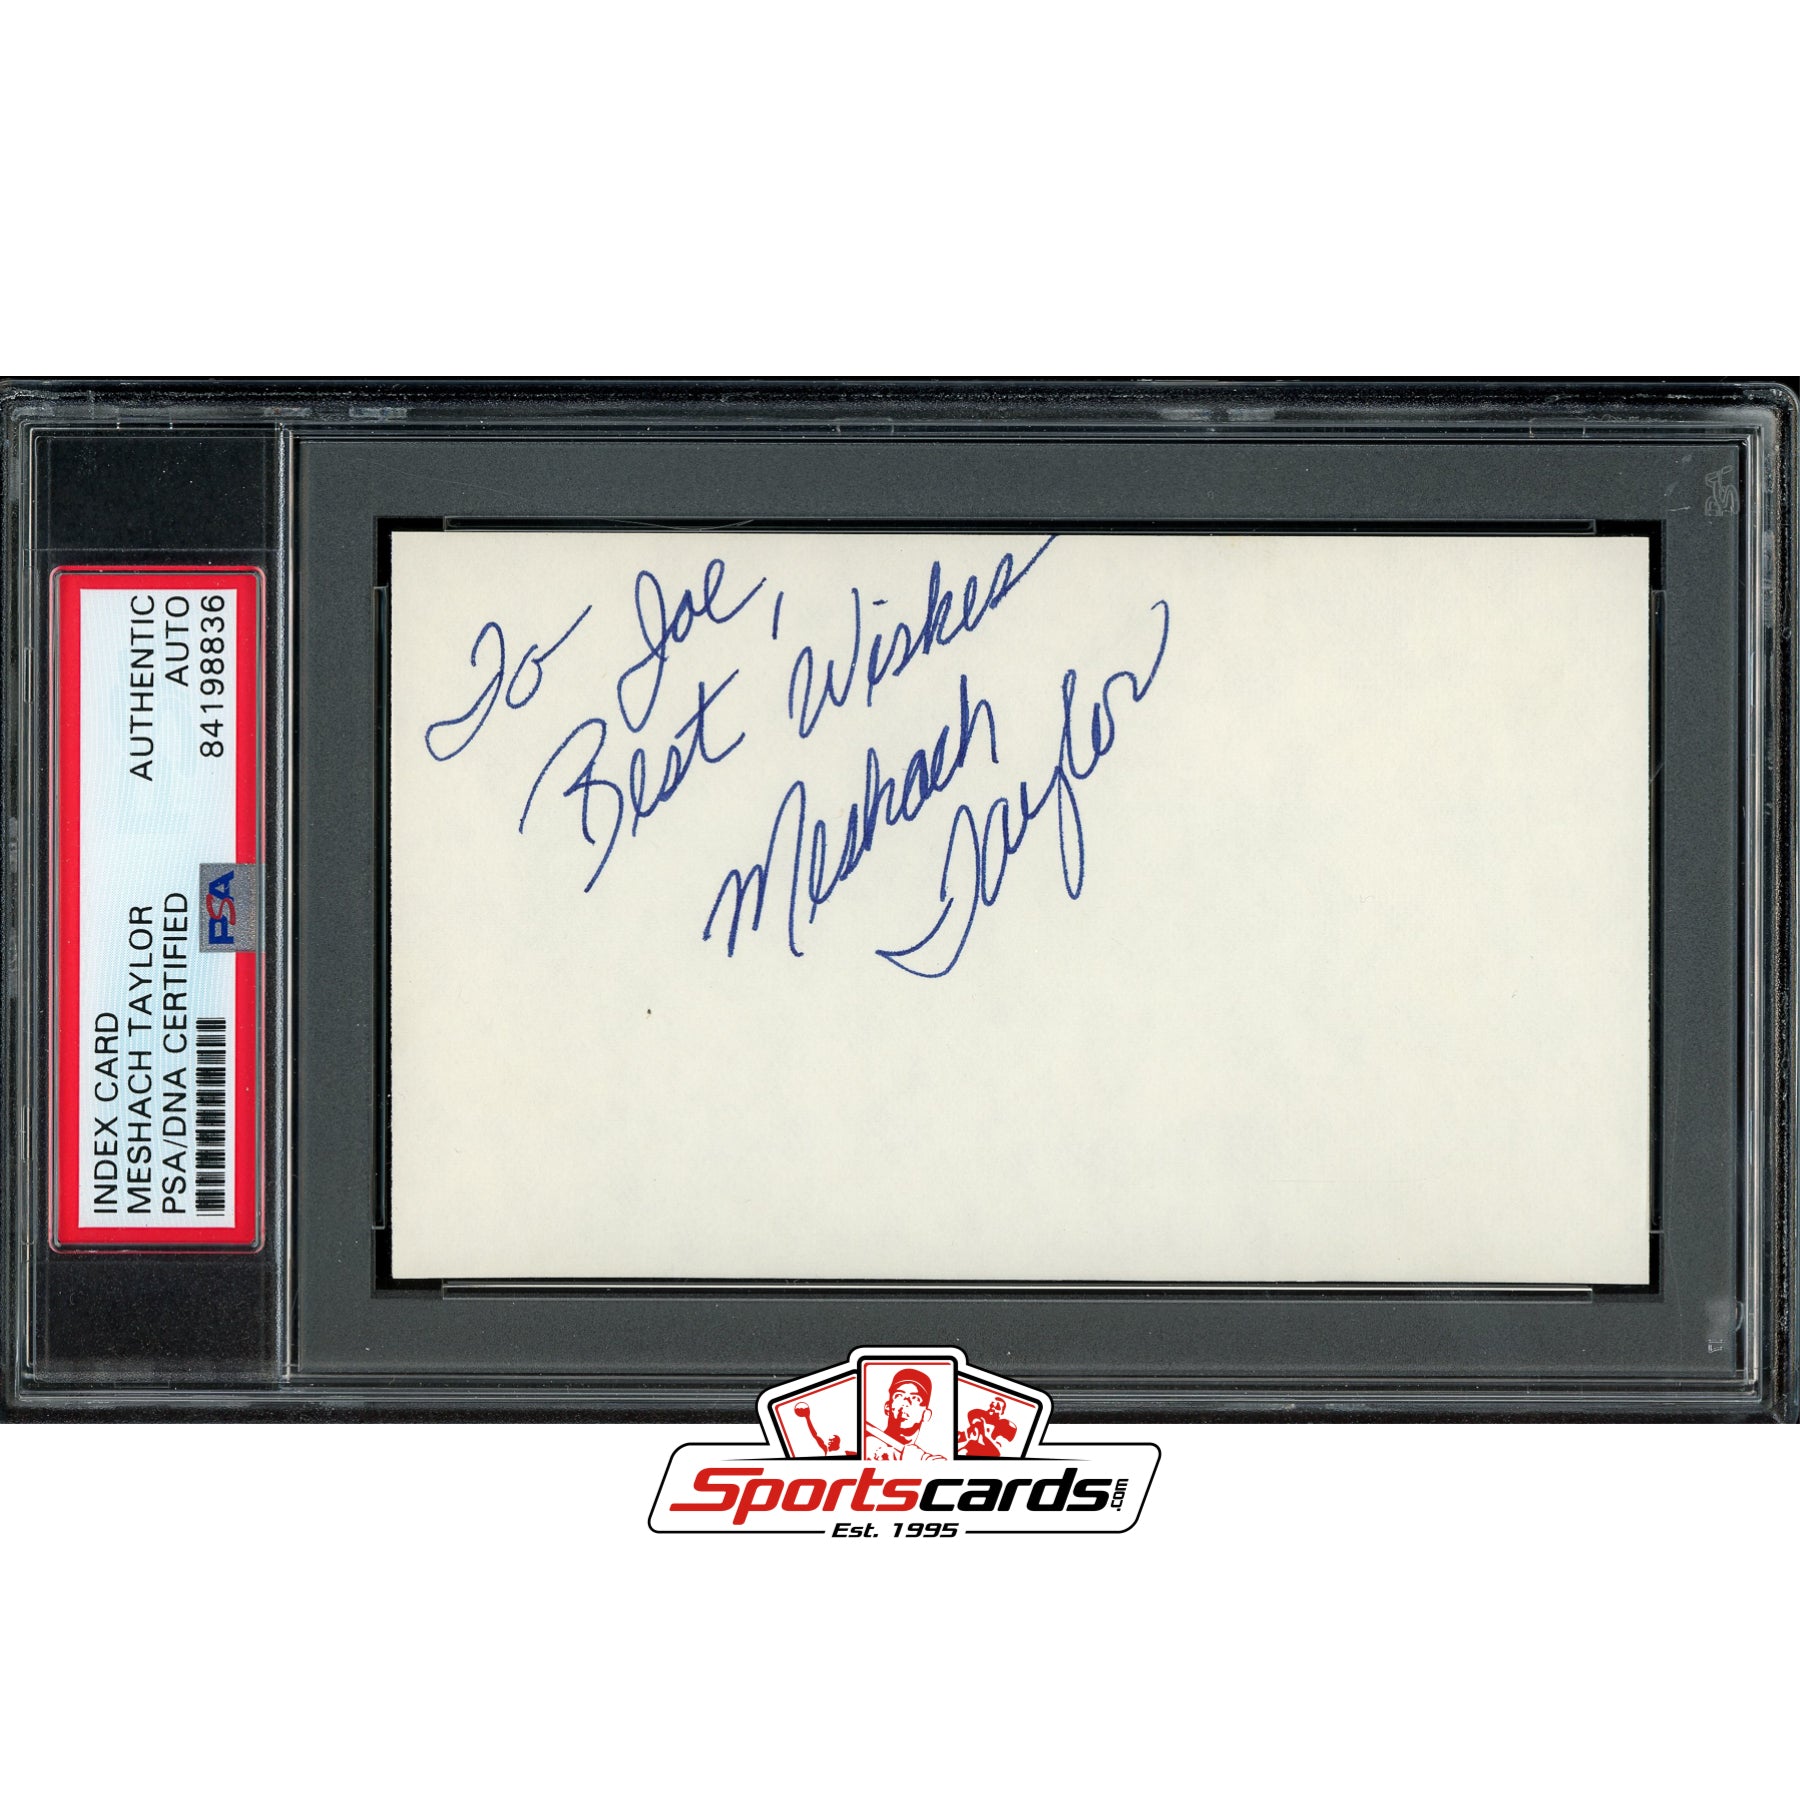 Meshach Taylor (d.2014) Signed Auto 3x5 Index Card PSA/DNA Actor